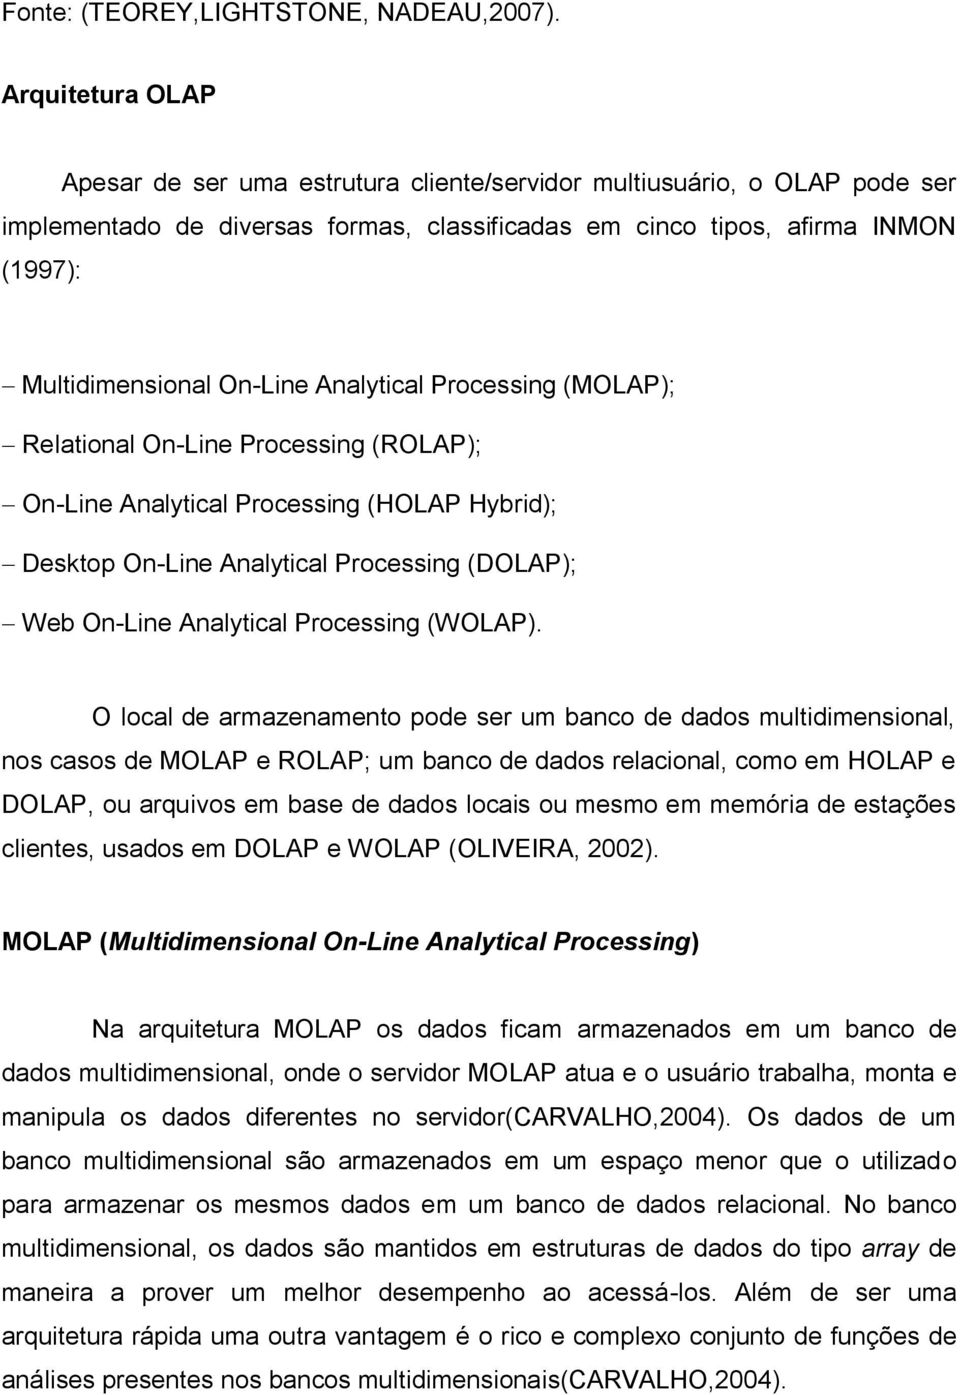 On-Line Analytical Processing (MOLAP); Relational On-Line Processing (ROLAP); On-Line Analytical Processing (HOLAP Hybrid); Desktop On-Line Analytical Processing (DOLAP); Web On-Line Analytical